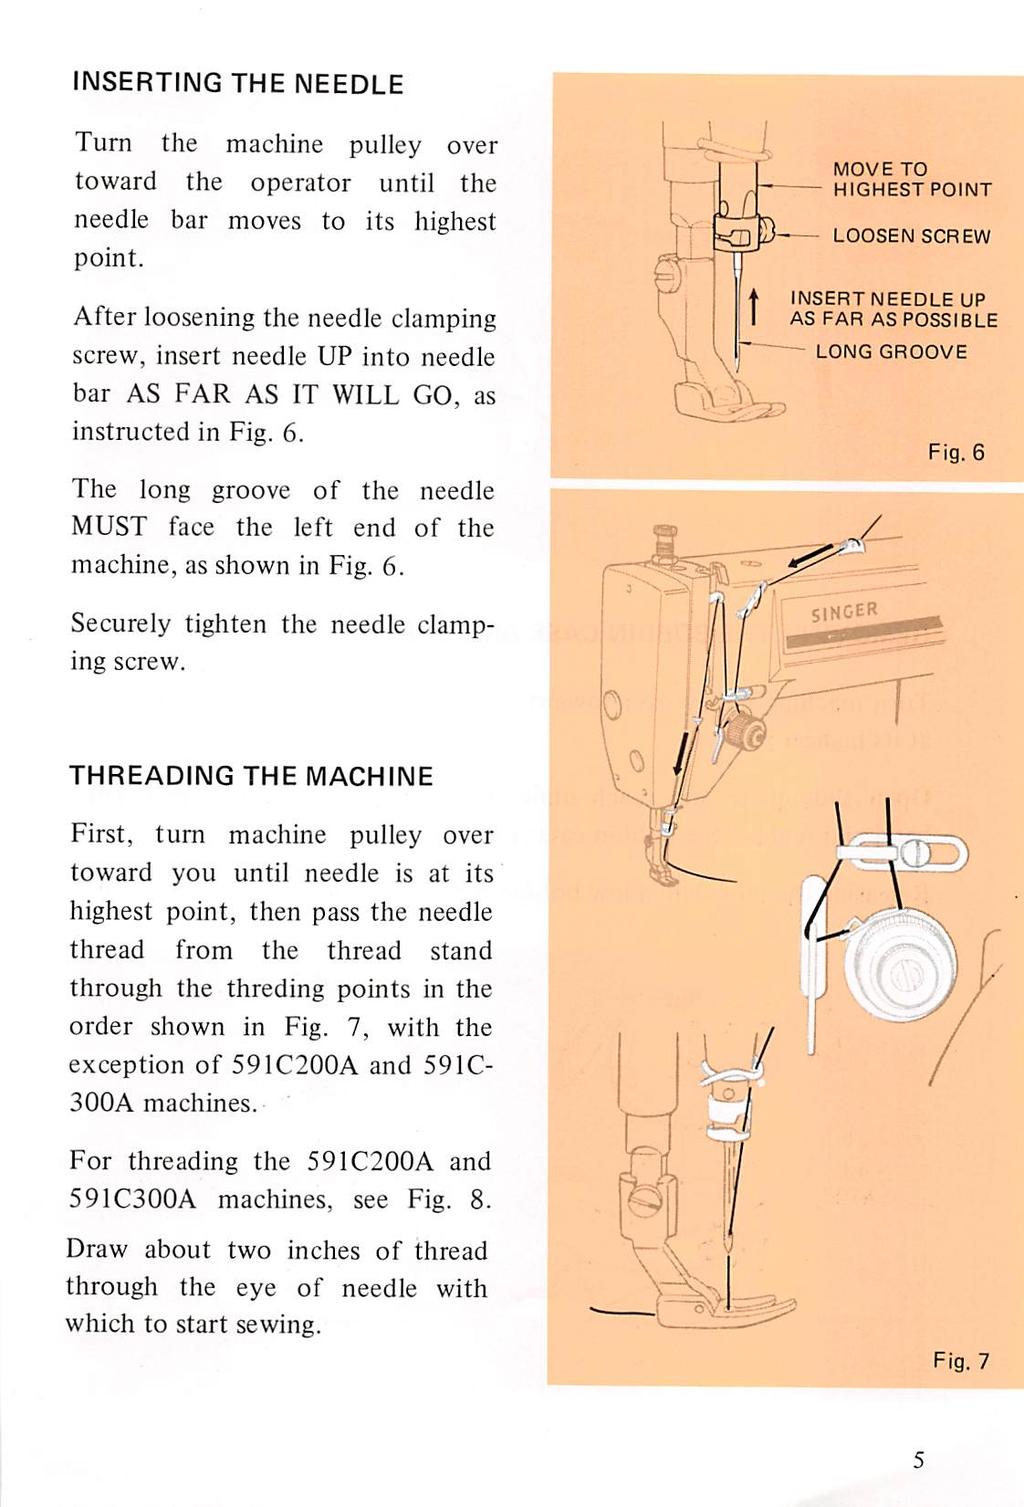 INSERTING THE NEEDLE Turn the machine pulley over toward the operator until the needle bar moves to its highest point.